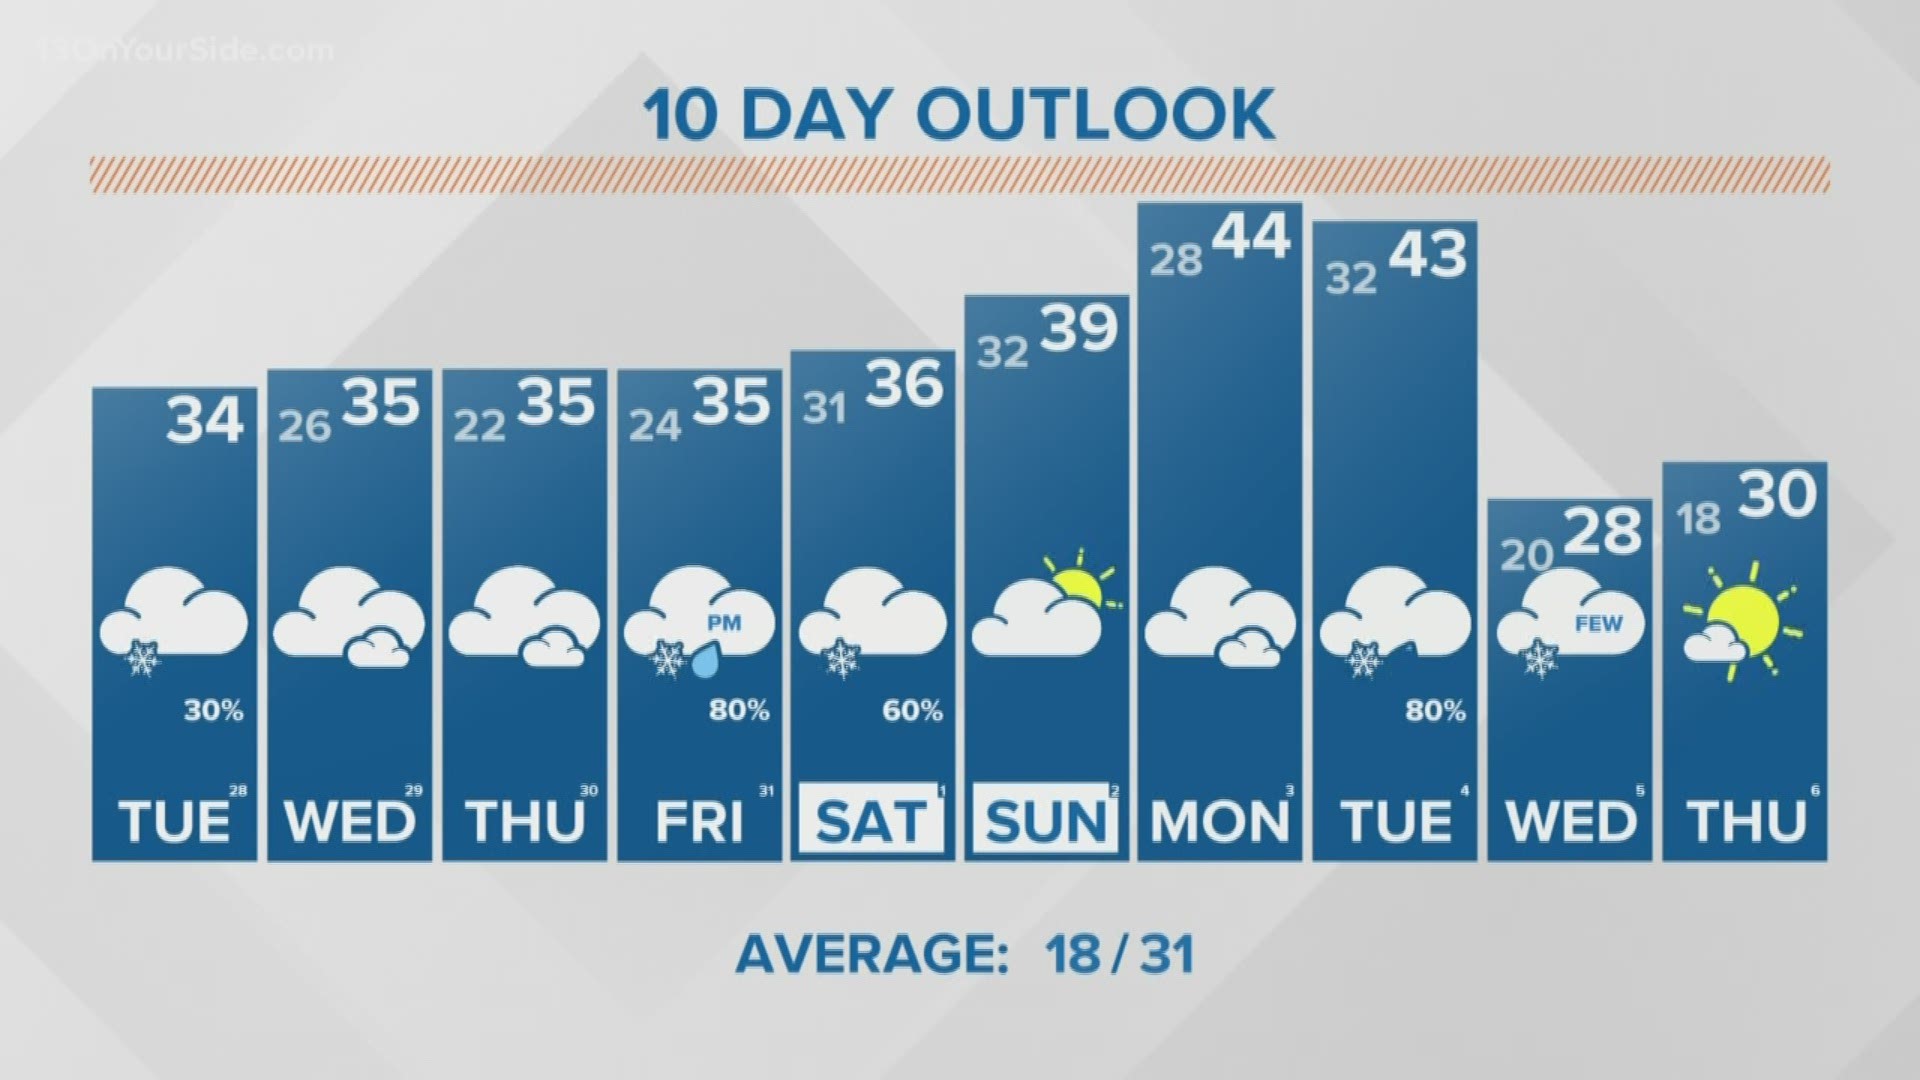 Our weather pattern remains quiet through the week with the next wintry system coming Friday evening.